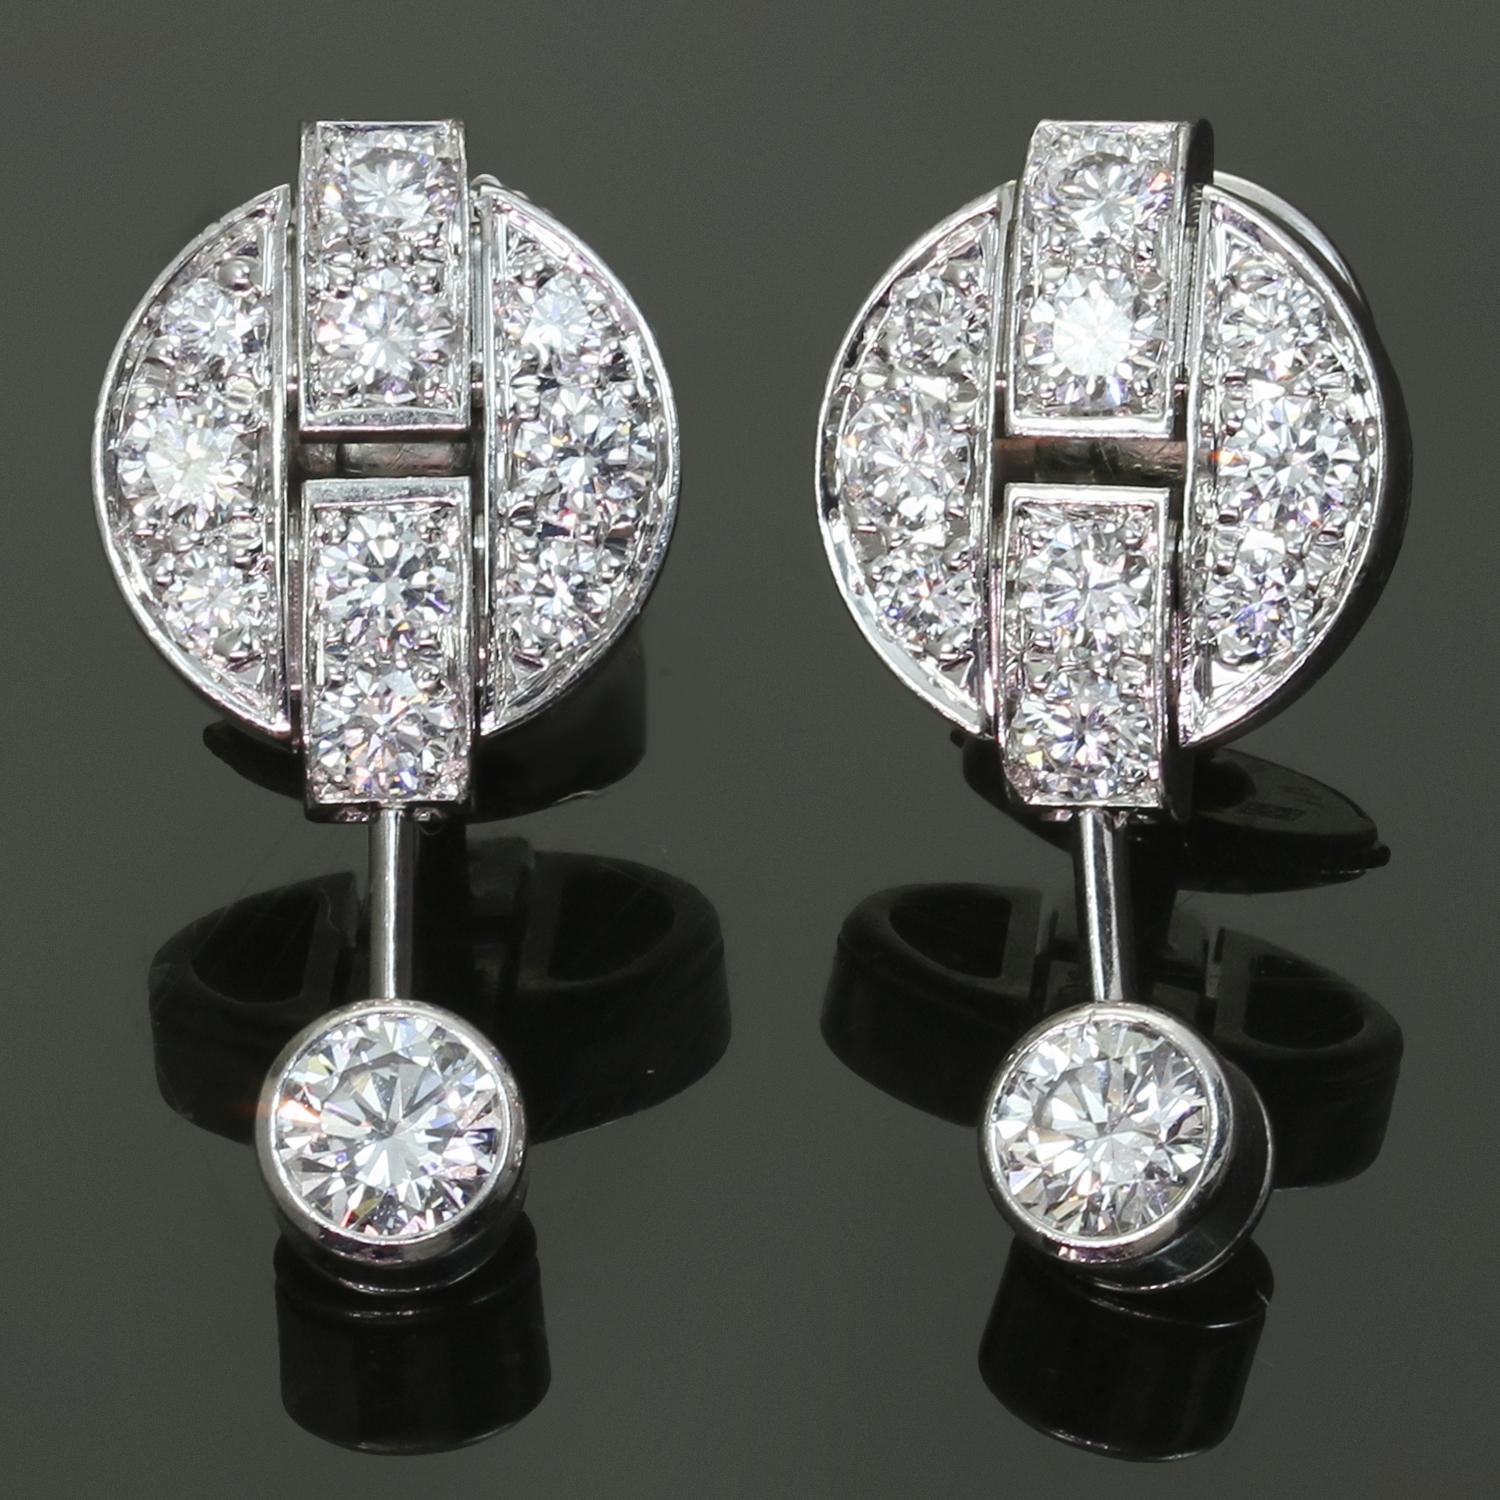 These gorgeous Cartier drop earrings are crafted in 18k white gold and set with brilliant-cut round D-F VVS1-VVS2 diamonds weighing an estimated 1.12 carats. Made in France circa 2000s. Measurements: 0.38